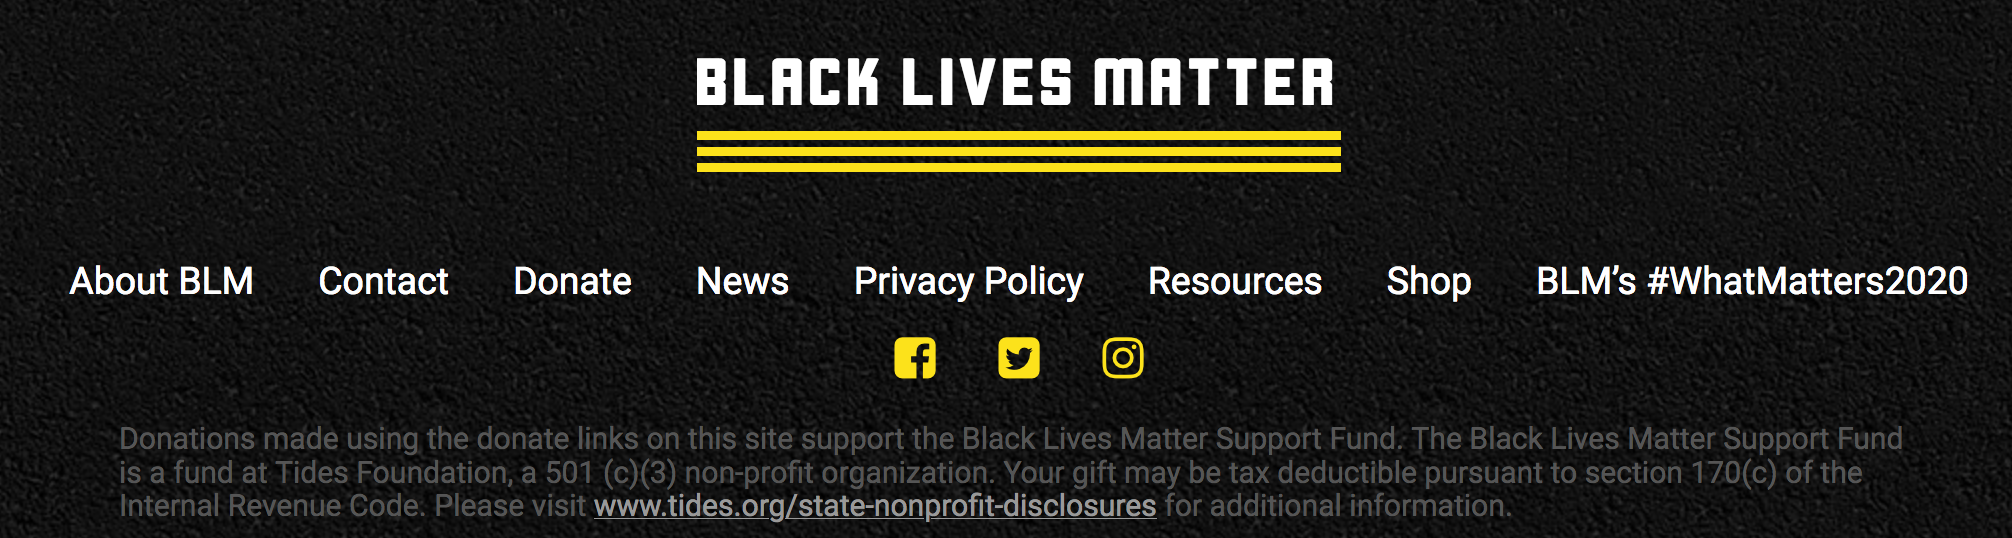 Black Lives Matter Inland Empire Announces Break With BLM Global Network: Calls Out Lack of Transparency, Democratic Party Control 2